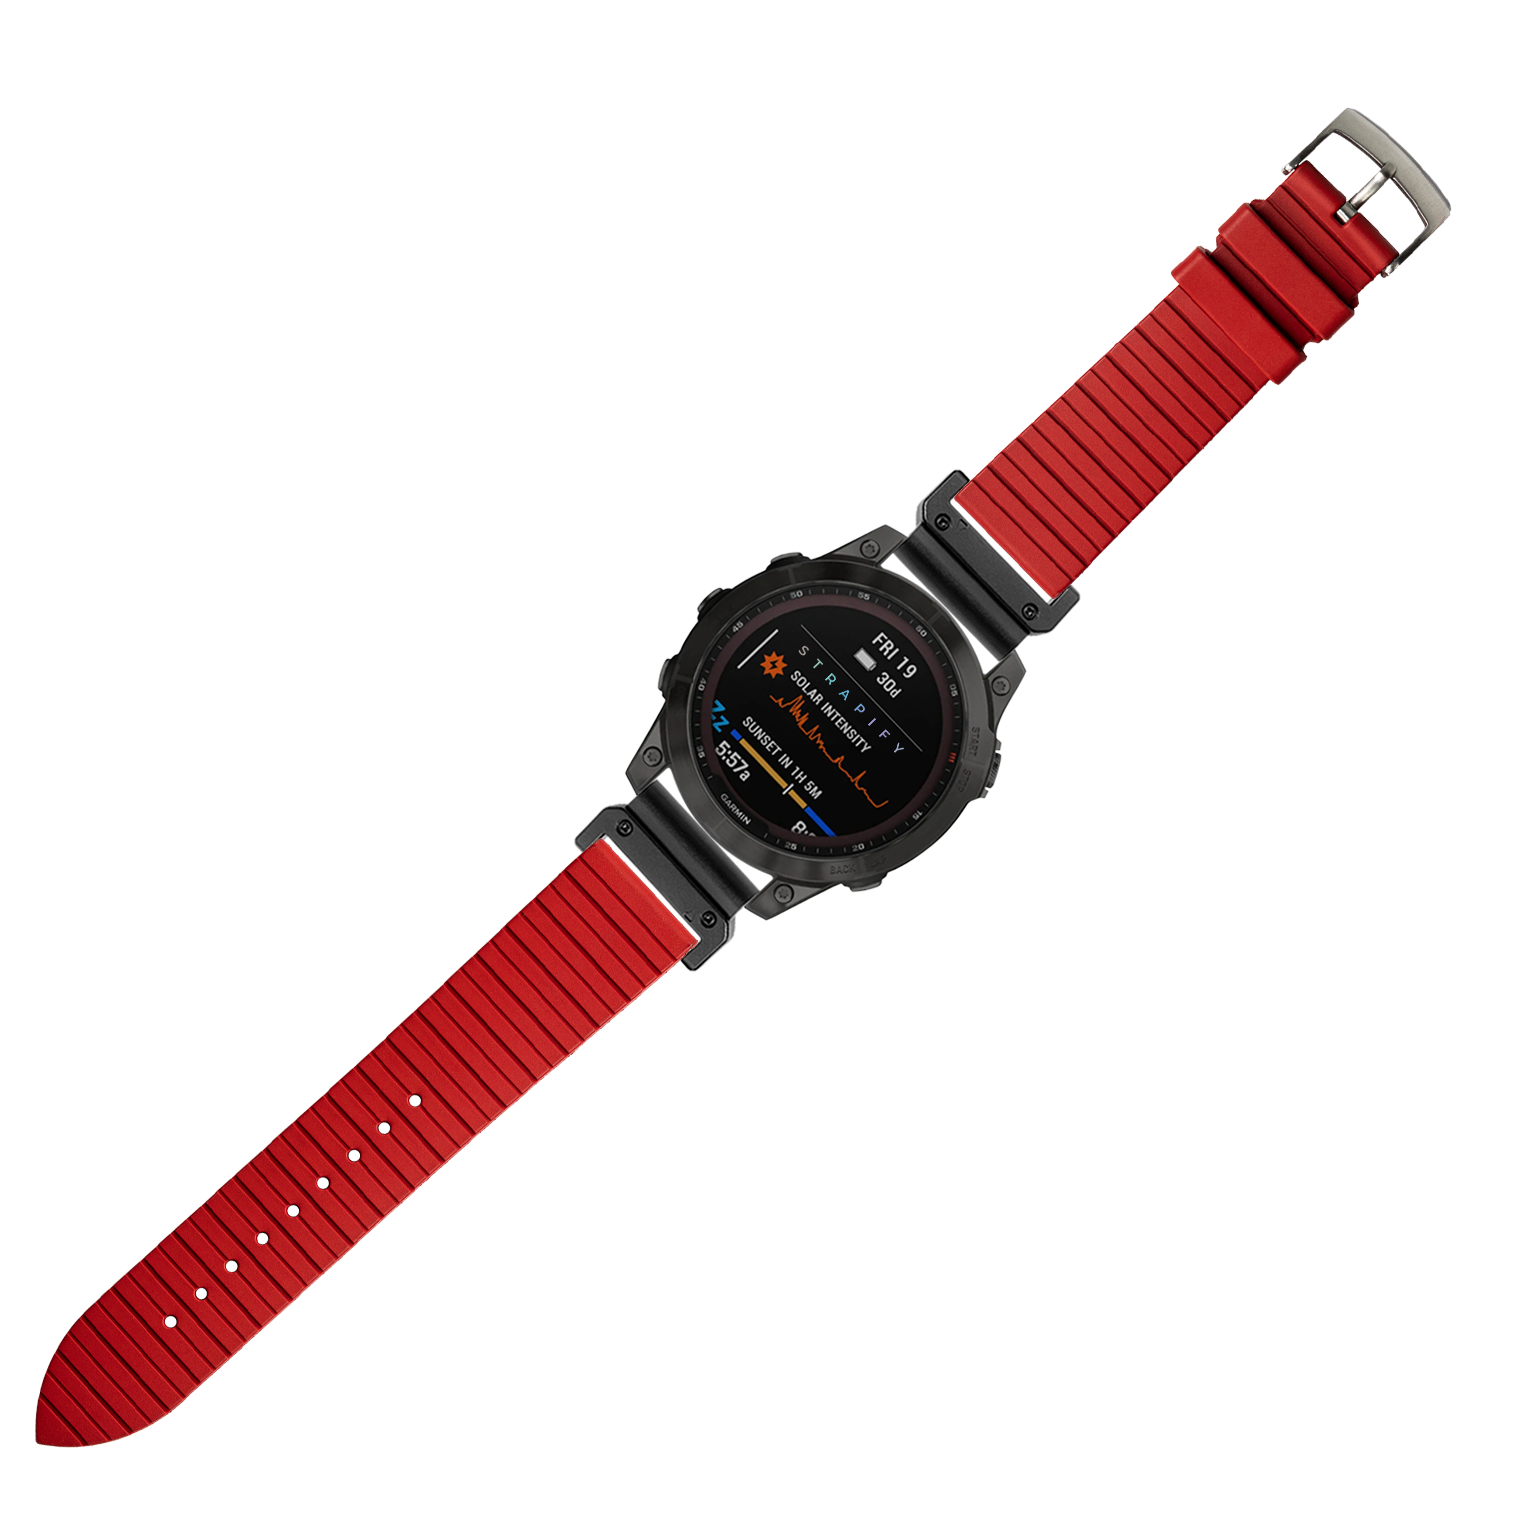 [QuickFit] King Panelarc FKM Rubber - Red 26mm